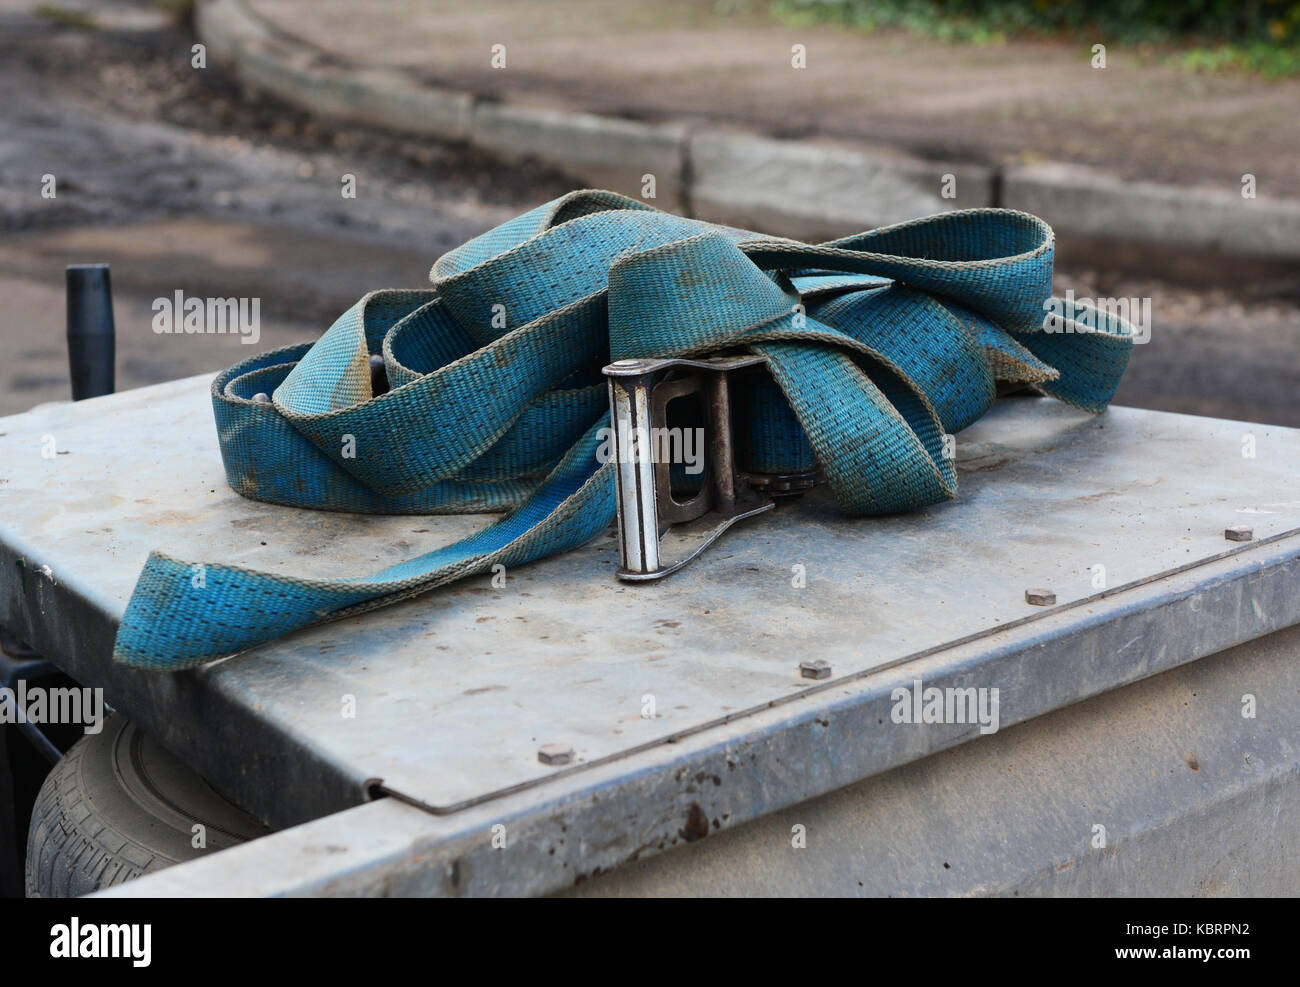 Blue nylon industrial strap with a metal buckle, piled on a metal trailer in a street undergoing repairs Stock Photo